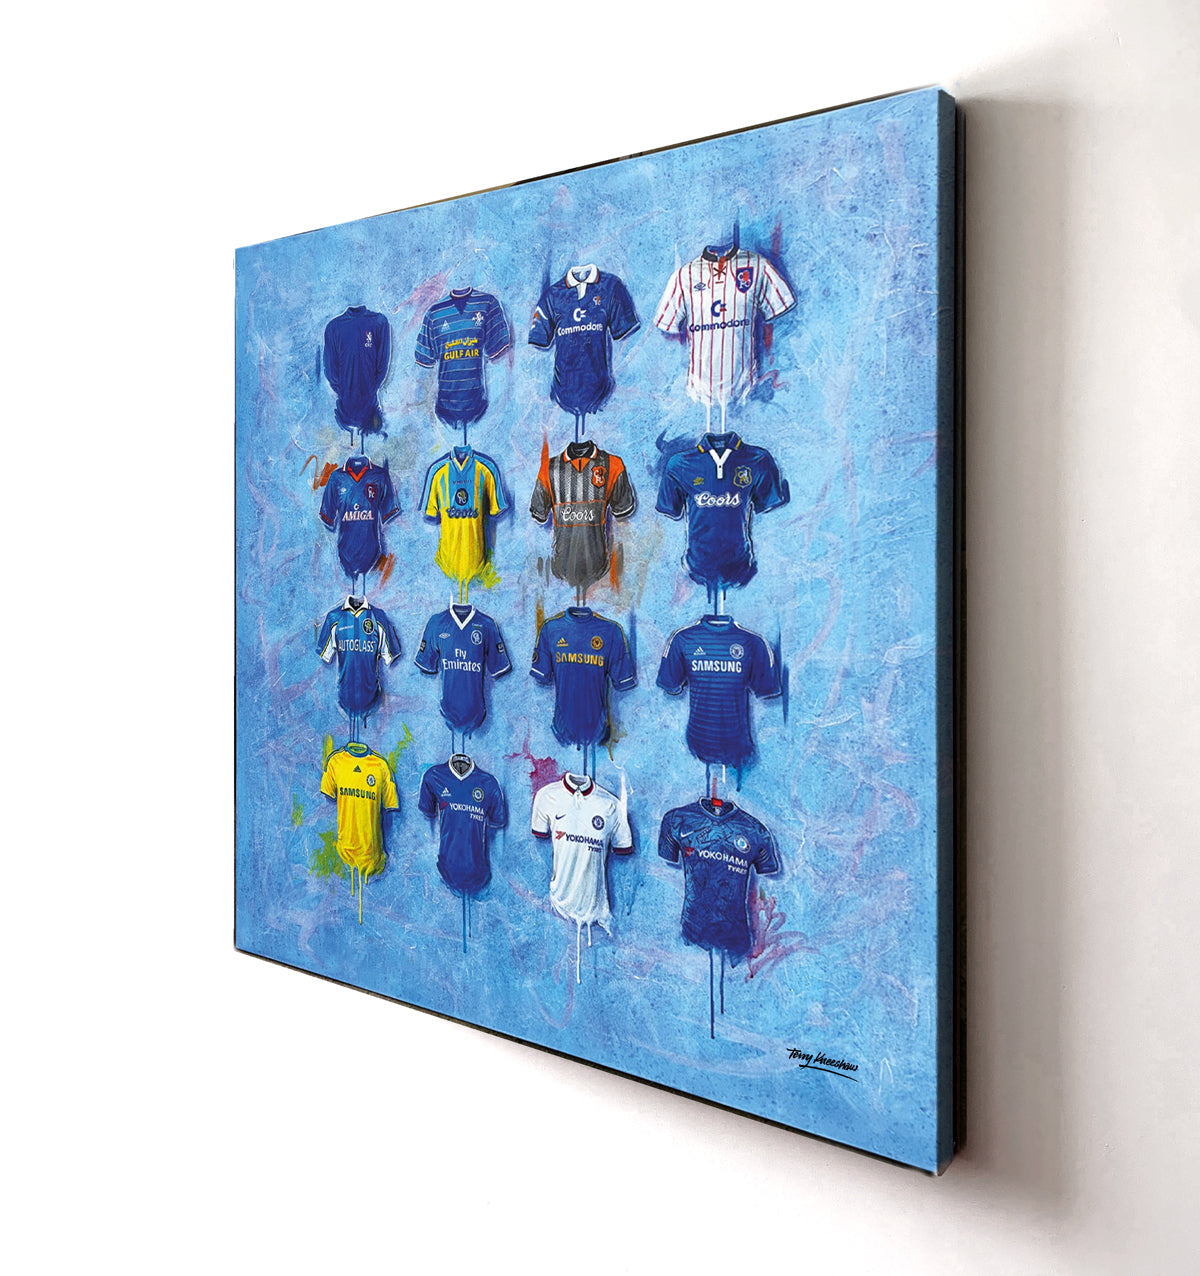 Chelsea Canvases by Terry Kneeshaw artworks that come in a variety of sizes, including 20x20, 30x30, and 40x40. Each canvas is available in a framed or unframed black floating frame. The artwork features a vibrant and dynamic abstract composition with a Chelsea theme, capturing the energy and excitement of the club. Ideal for any Chelsea fan or football lover, these canvases are a striking addition to any room and are sure to impress with their unique style and creativity.